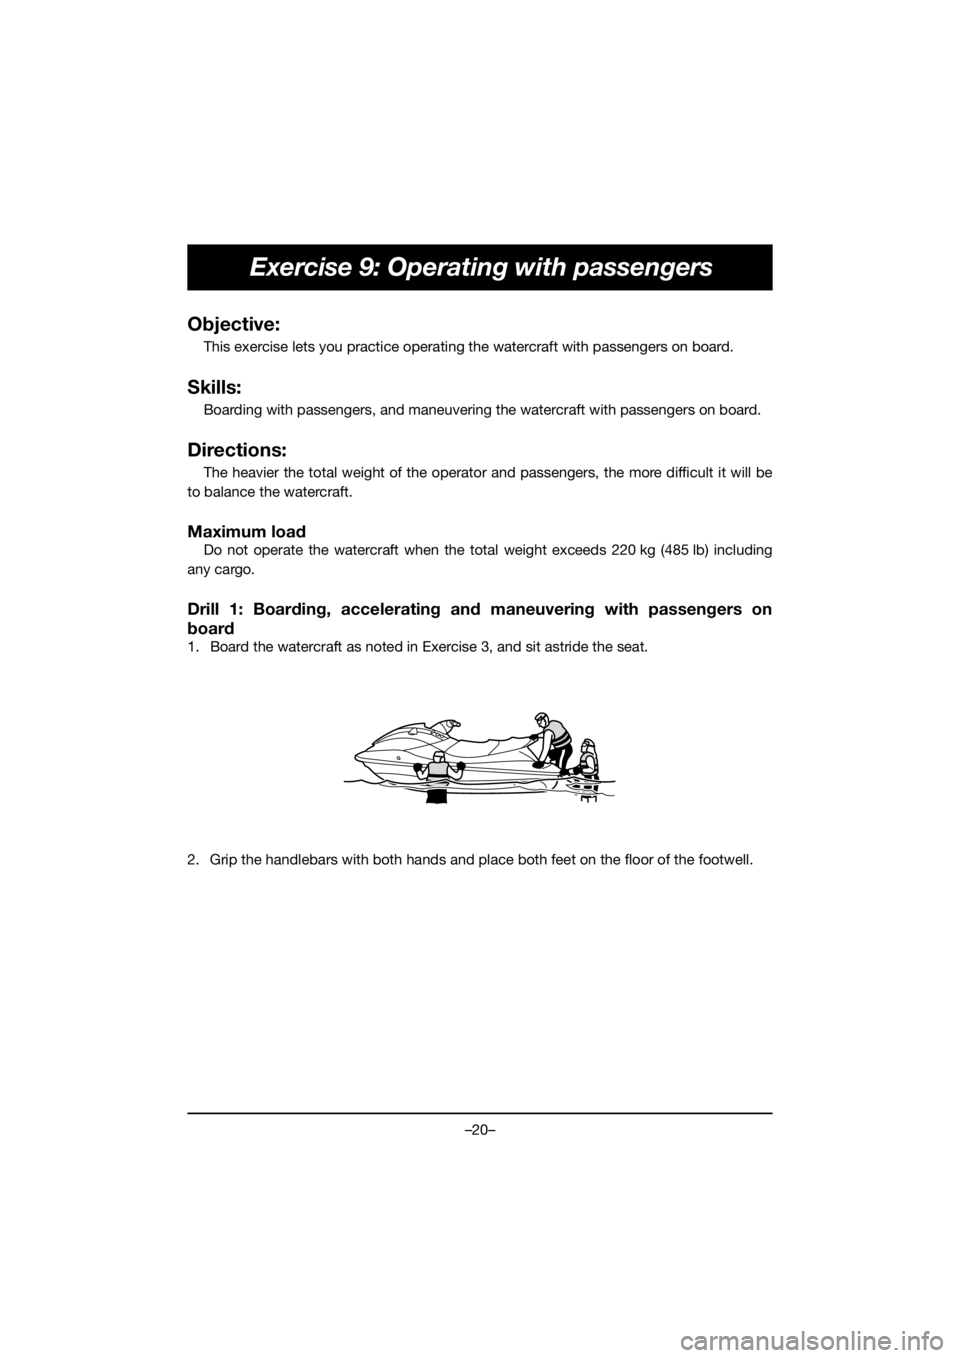 YAMAHA EXR 2019  Manuale de Empleo (in Spanish) –20–
Exercise 9: Operating with passengers
Objective:
This exercise lets you practice operating the watercraft with passengers on board.
Skills:
Boarding with passengers, and maneuvering the water